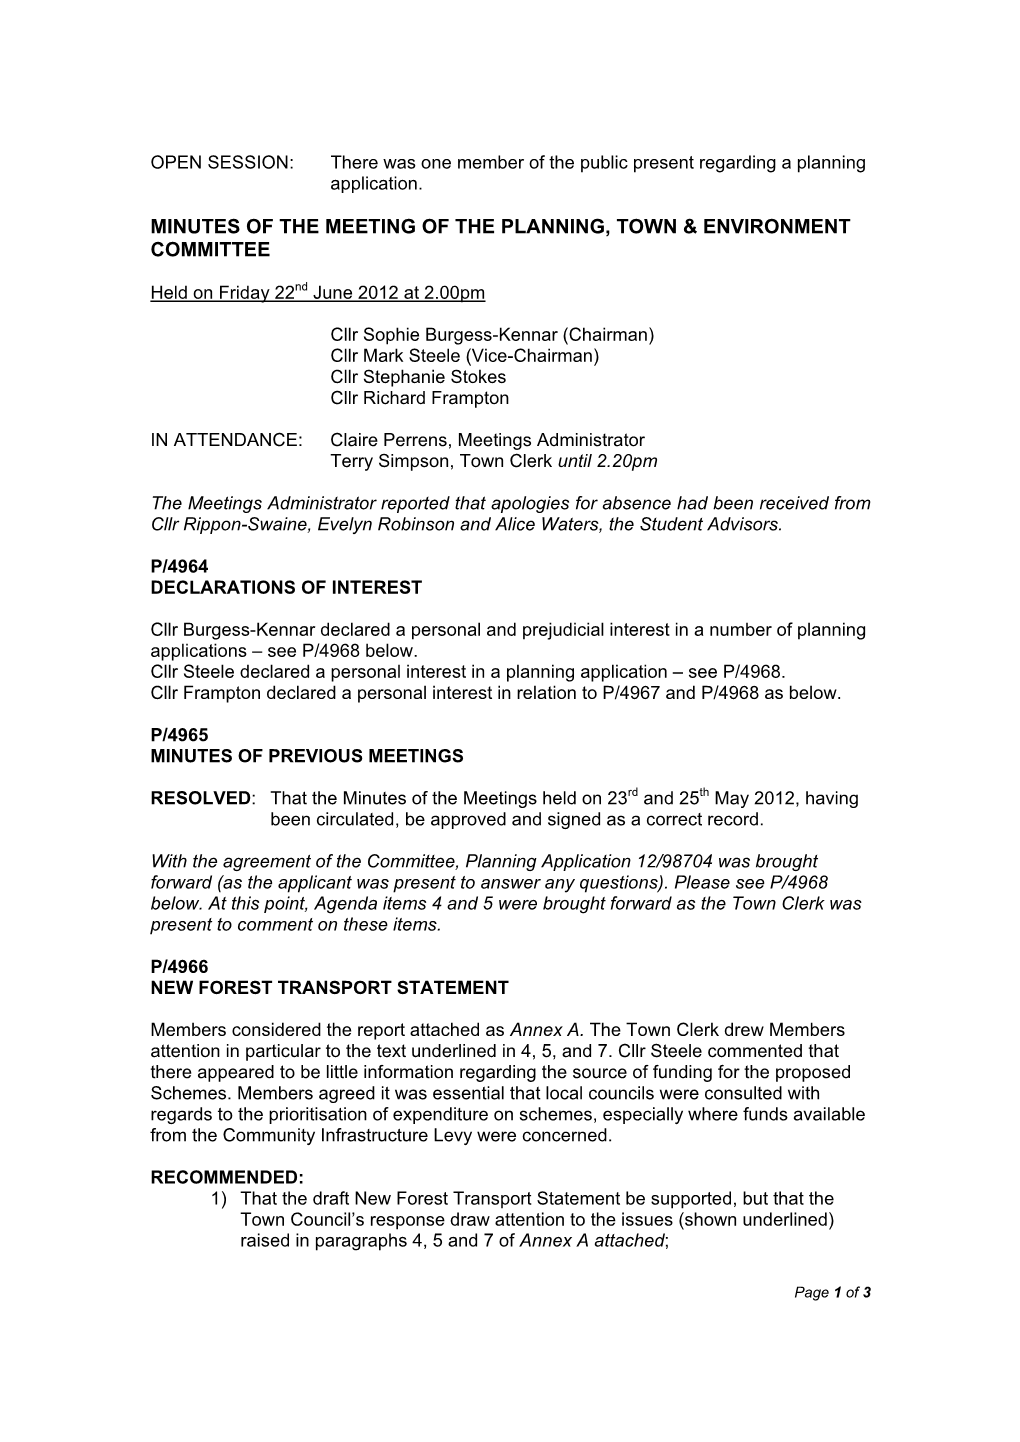 Minutes of the Meeting of the Planning, Town & Environment Committee